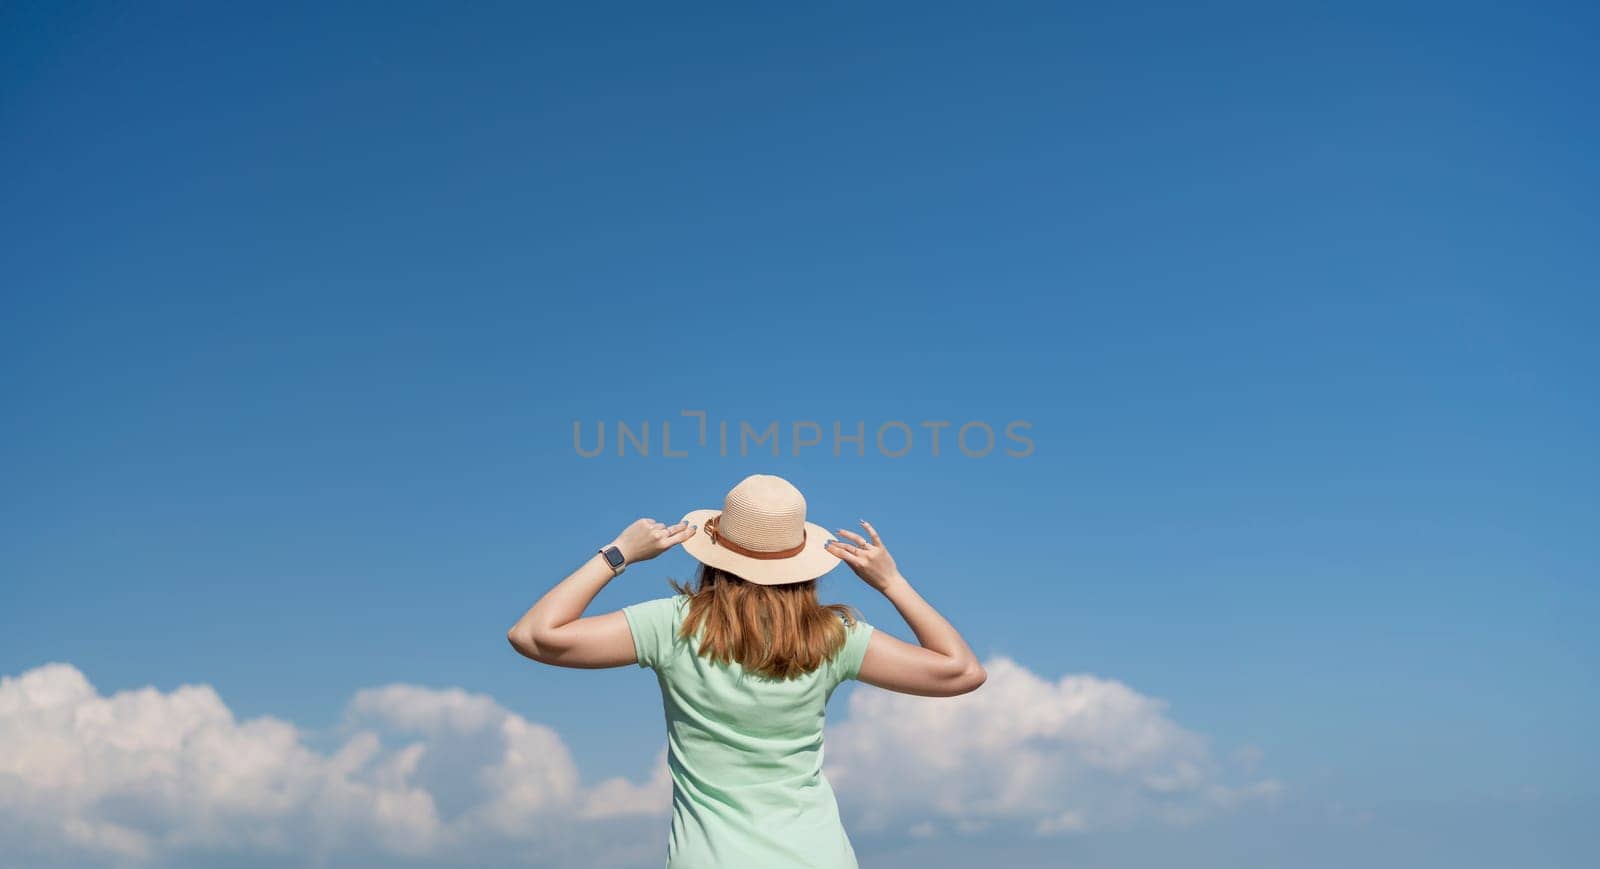 A woman wearing a straw hat is standing in a field with a clear blue sky above her. She is looking up at the sky, possibly admiring the clouds or just enjoying the view